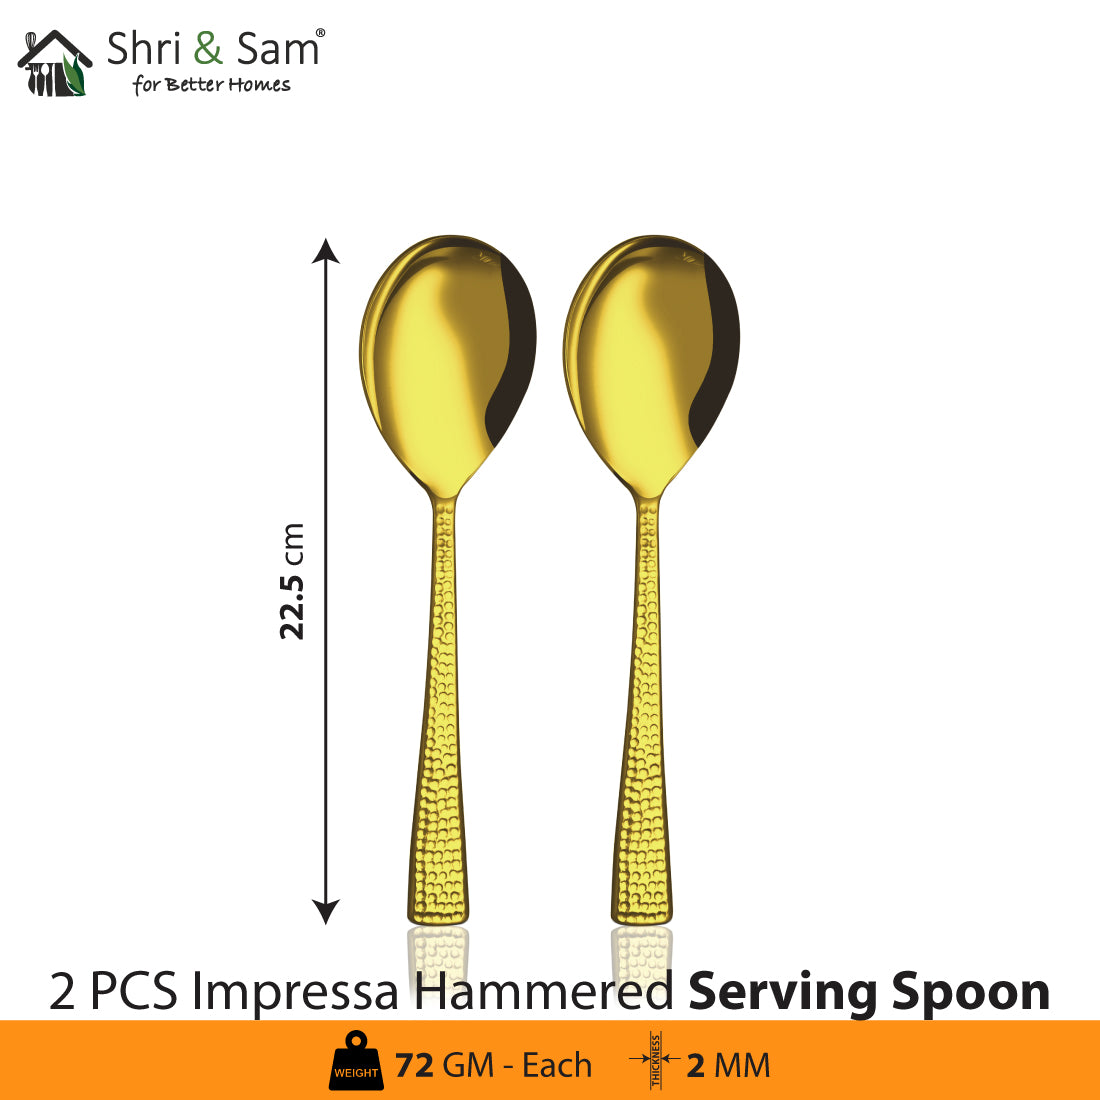 Stainless Steel Cutlery Impressa Hammered with Gold PVD Coating